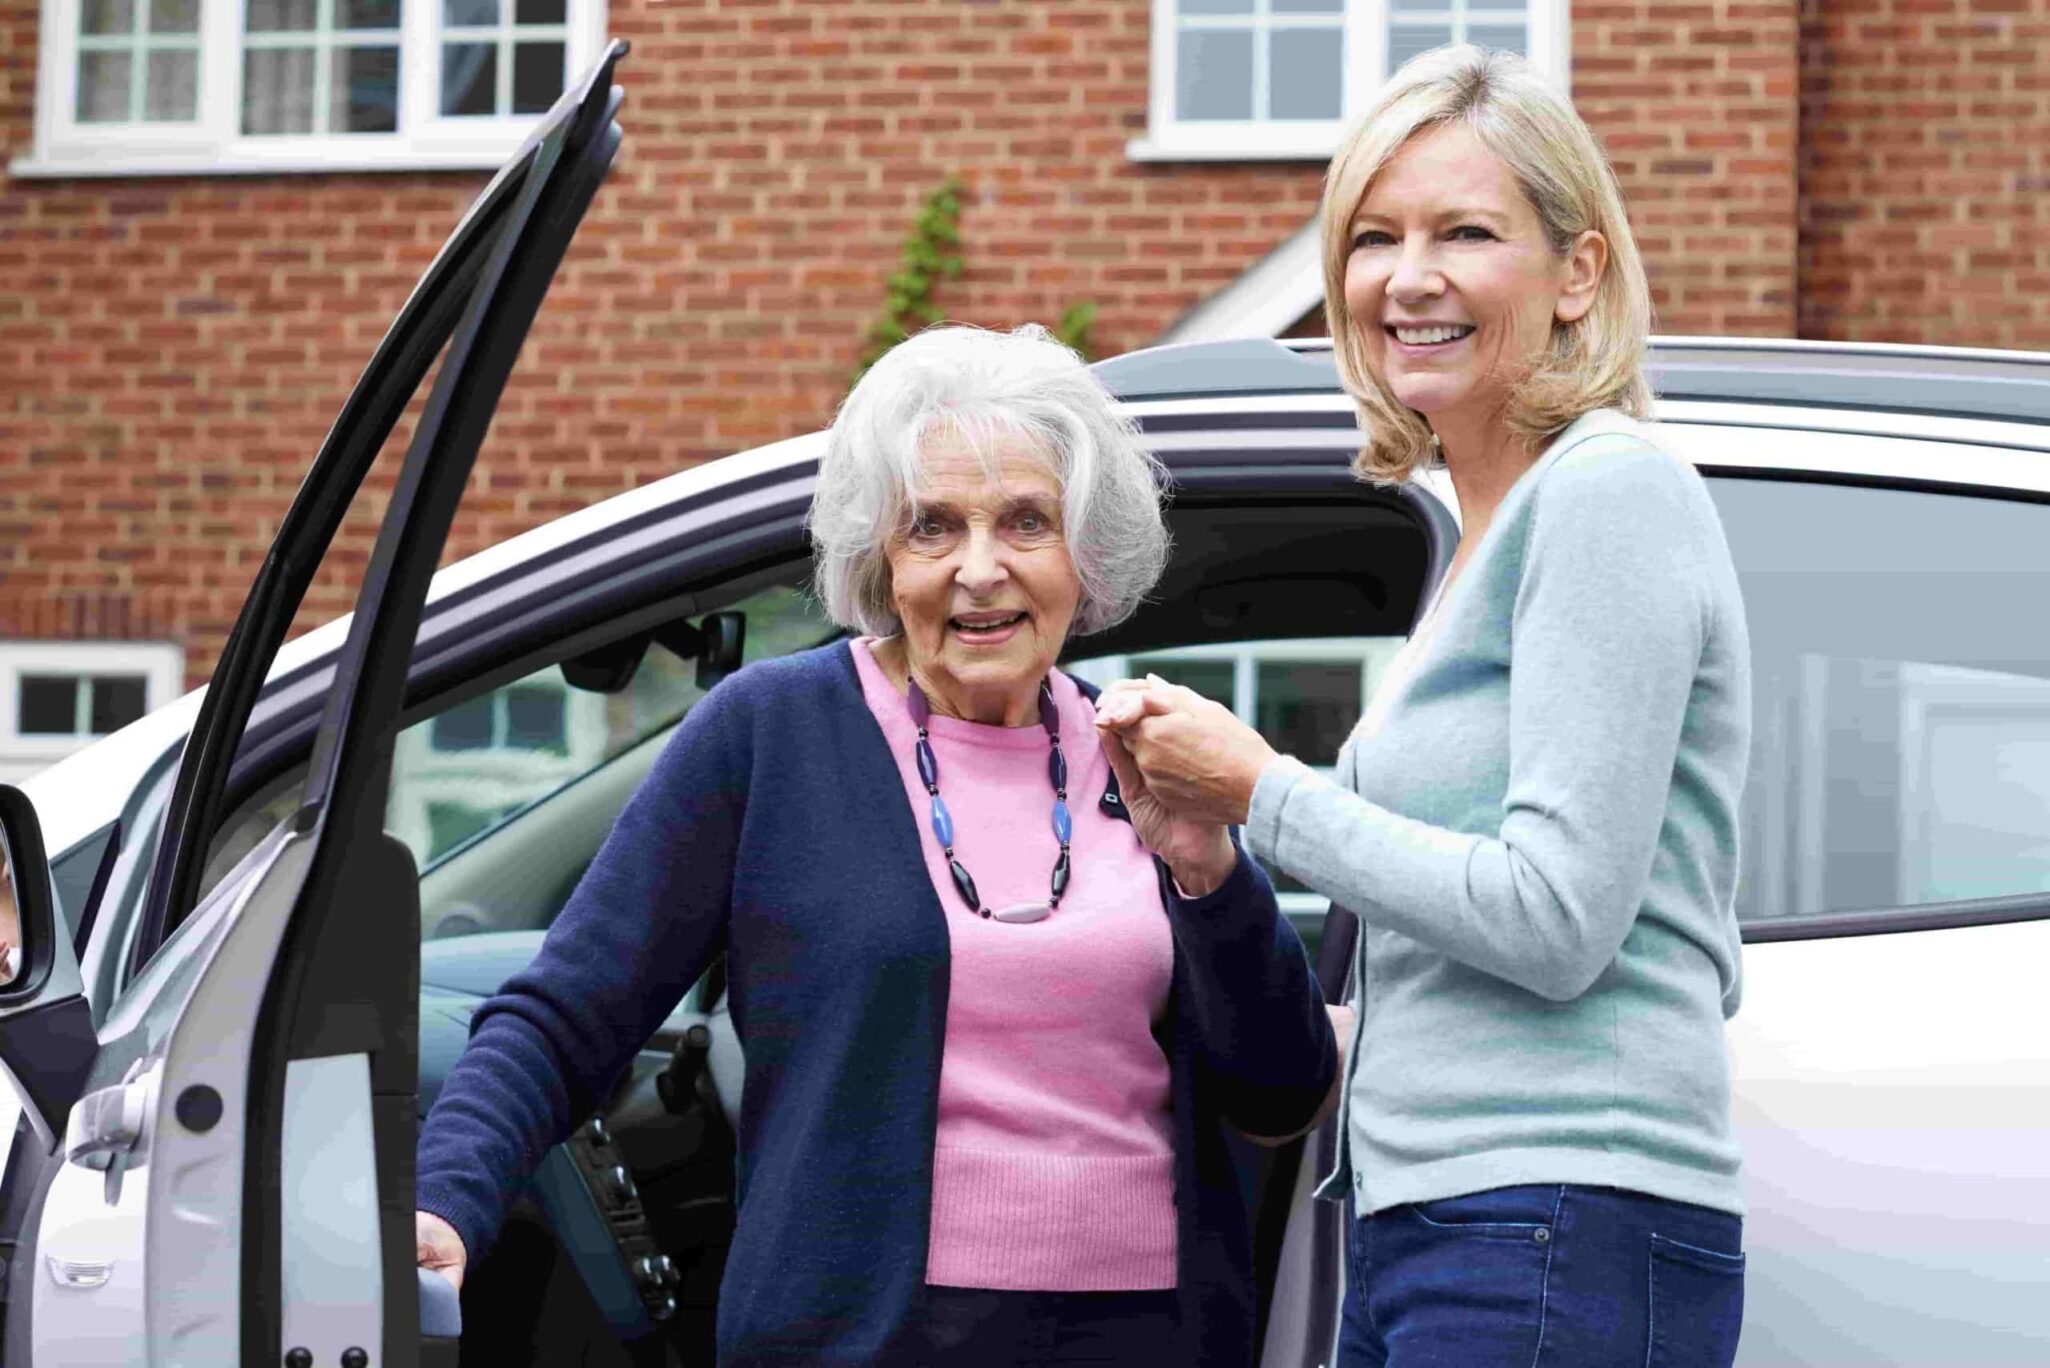 woman helping elderly woman out of car